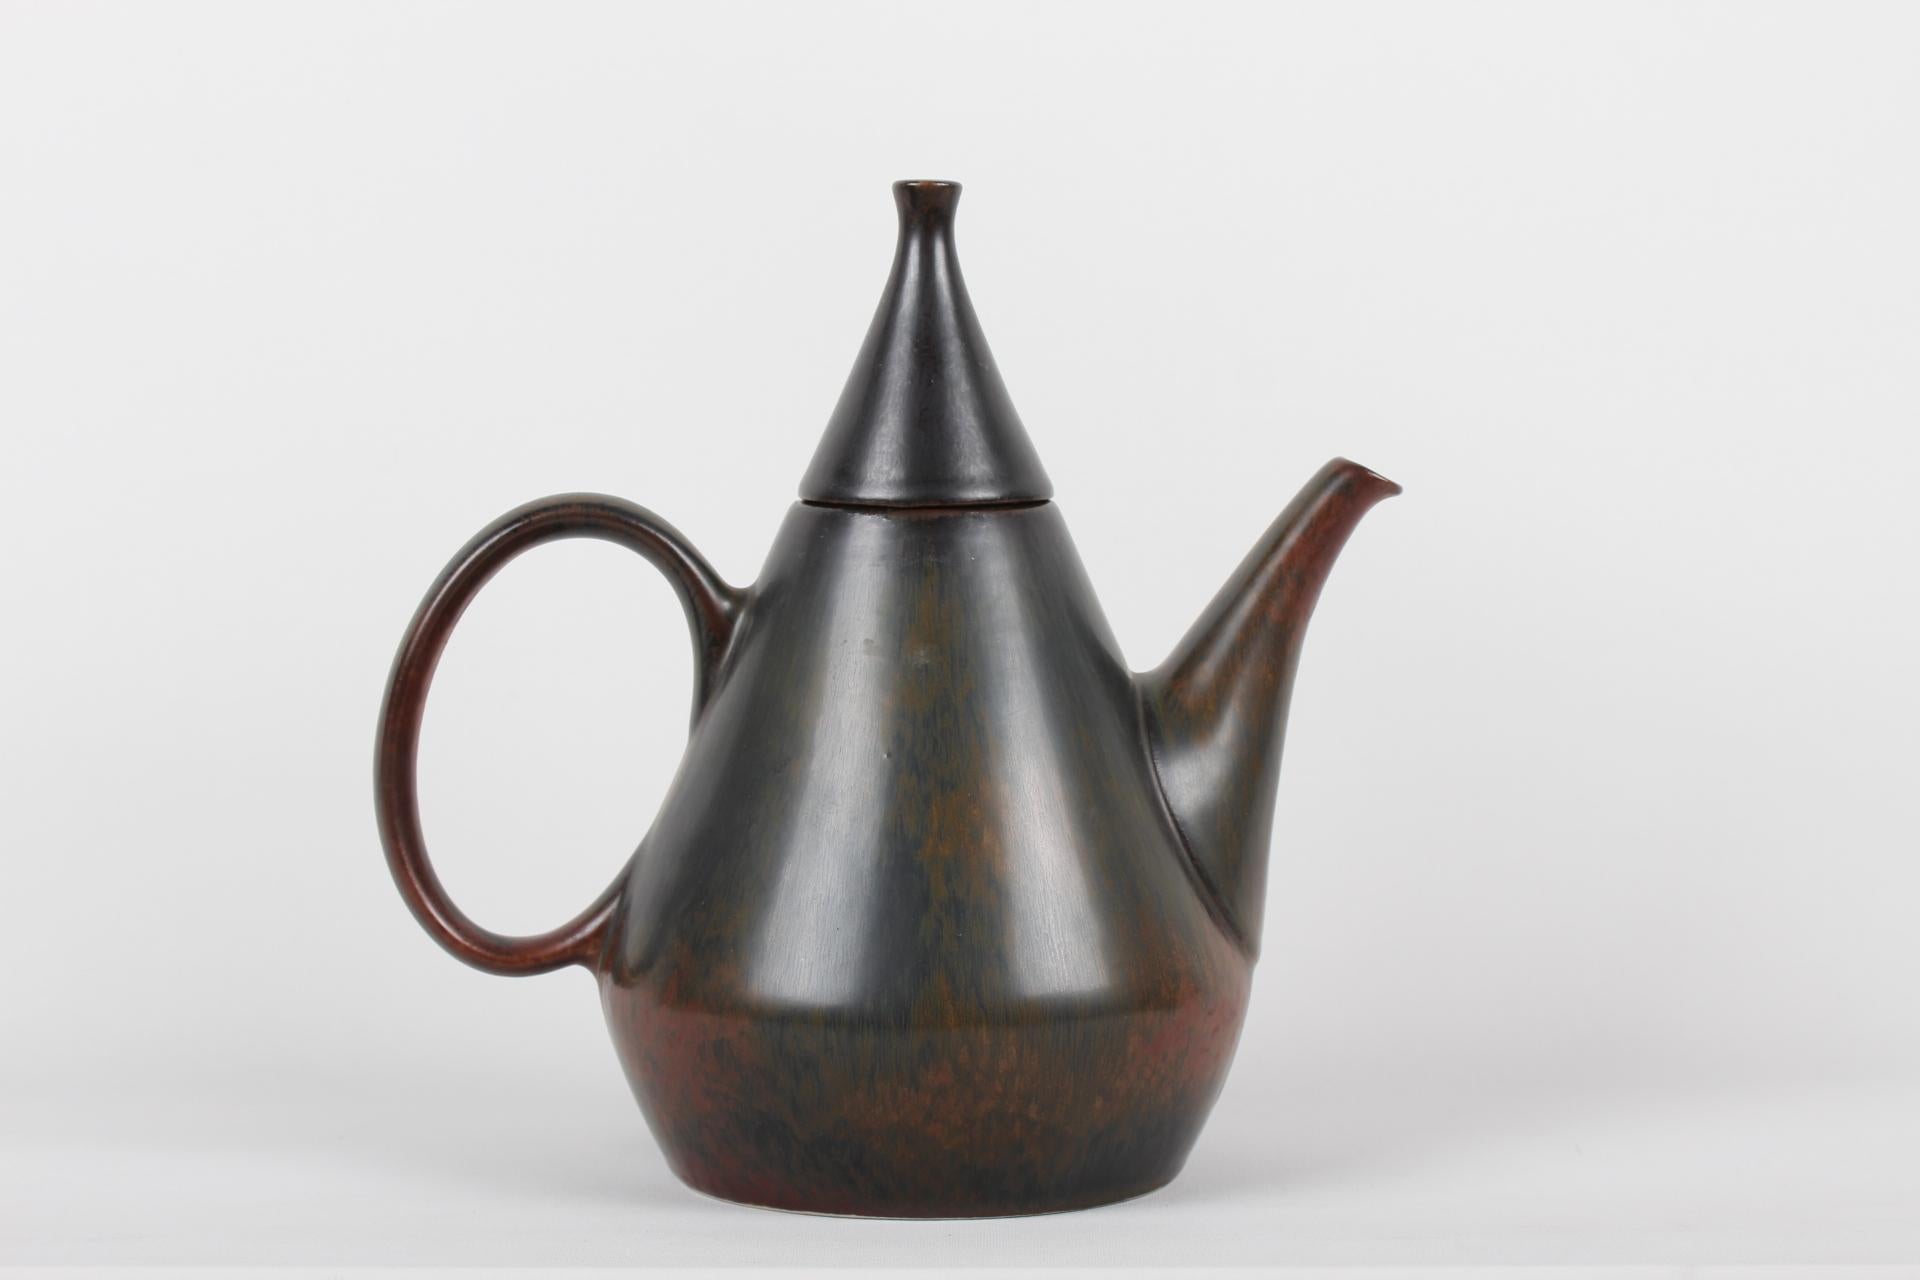 Scandinavian Modern Carl-Harry Staalhane Conical Ceramic Teapot Made by Rörstrand in Sweden, 1960s